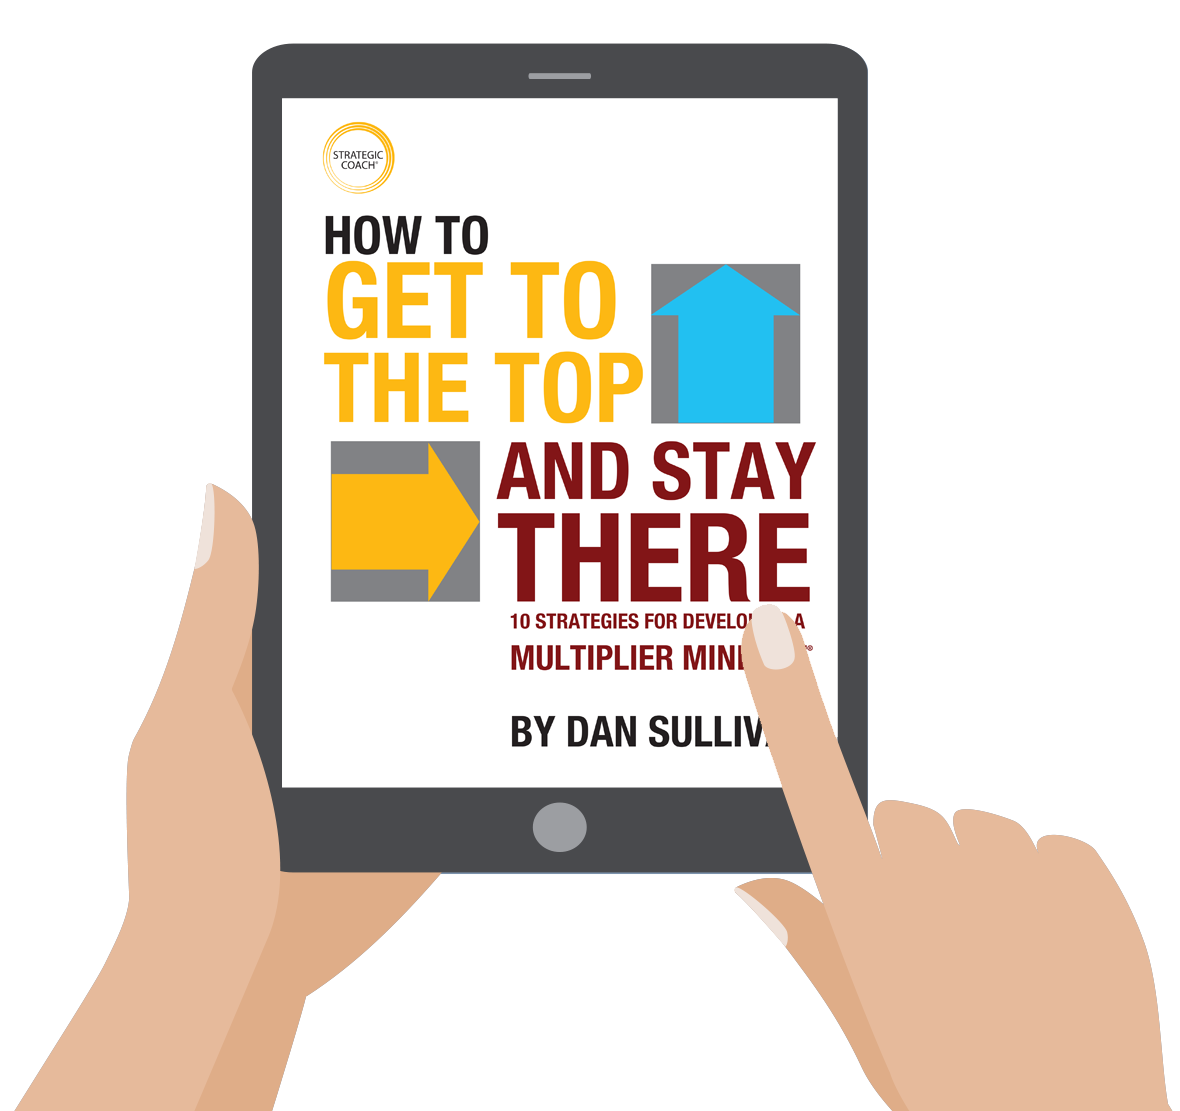 Download How To Get To The Top And Stay There.